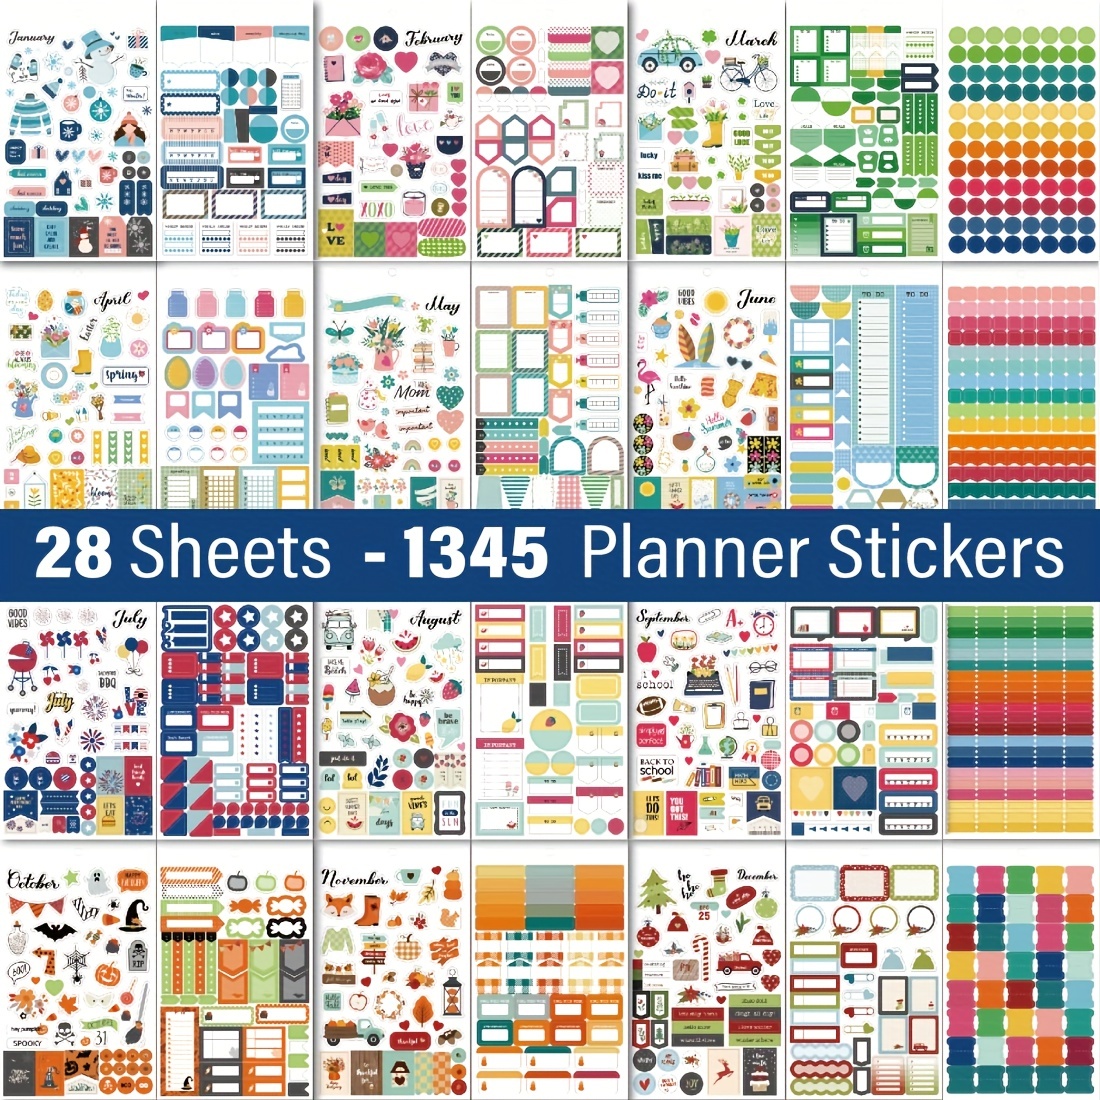 Aesthetic Planner Stickers For Fun Planning - 28 Sheets/ 1345 Monthly  Planner Stickers For Productivity Work, Seasonal Holiday Planner Stickers  Perfec